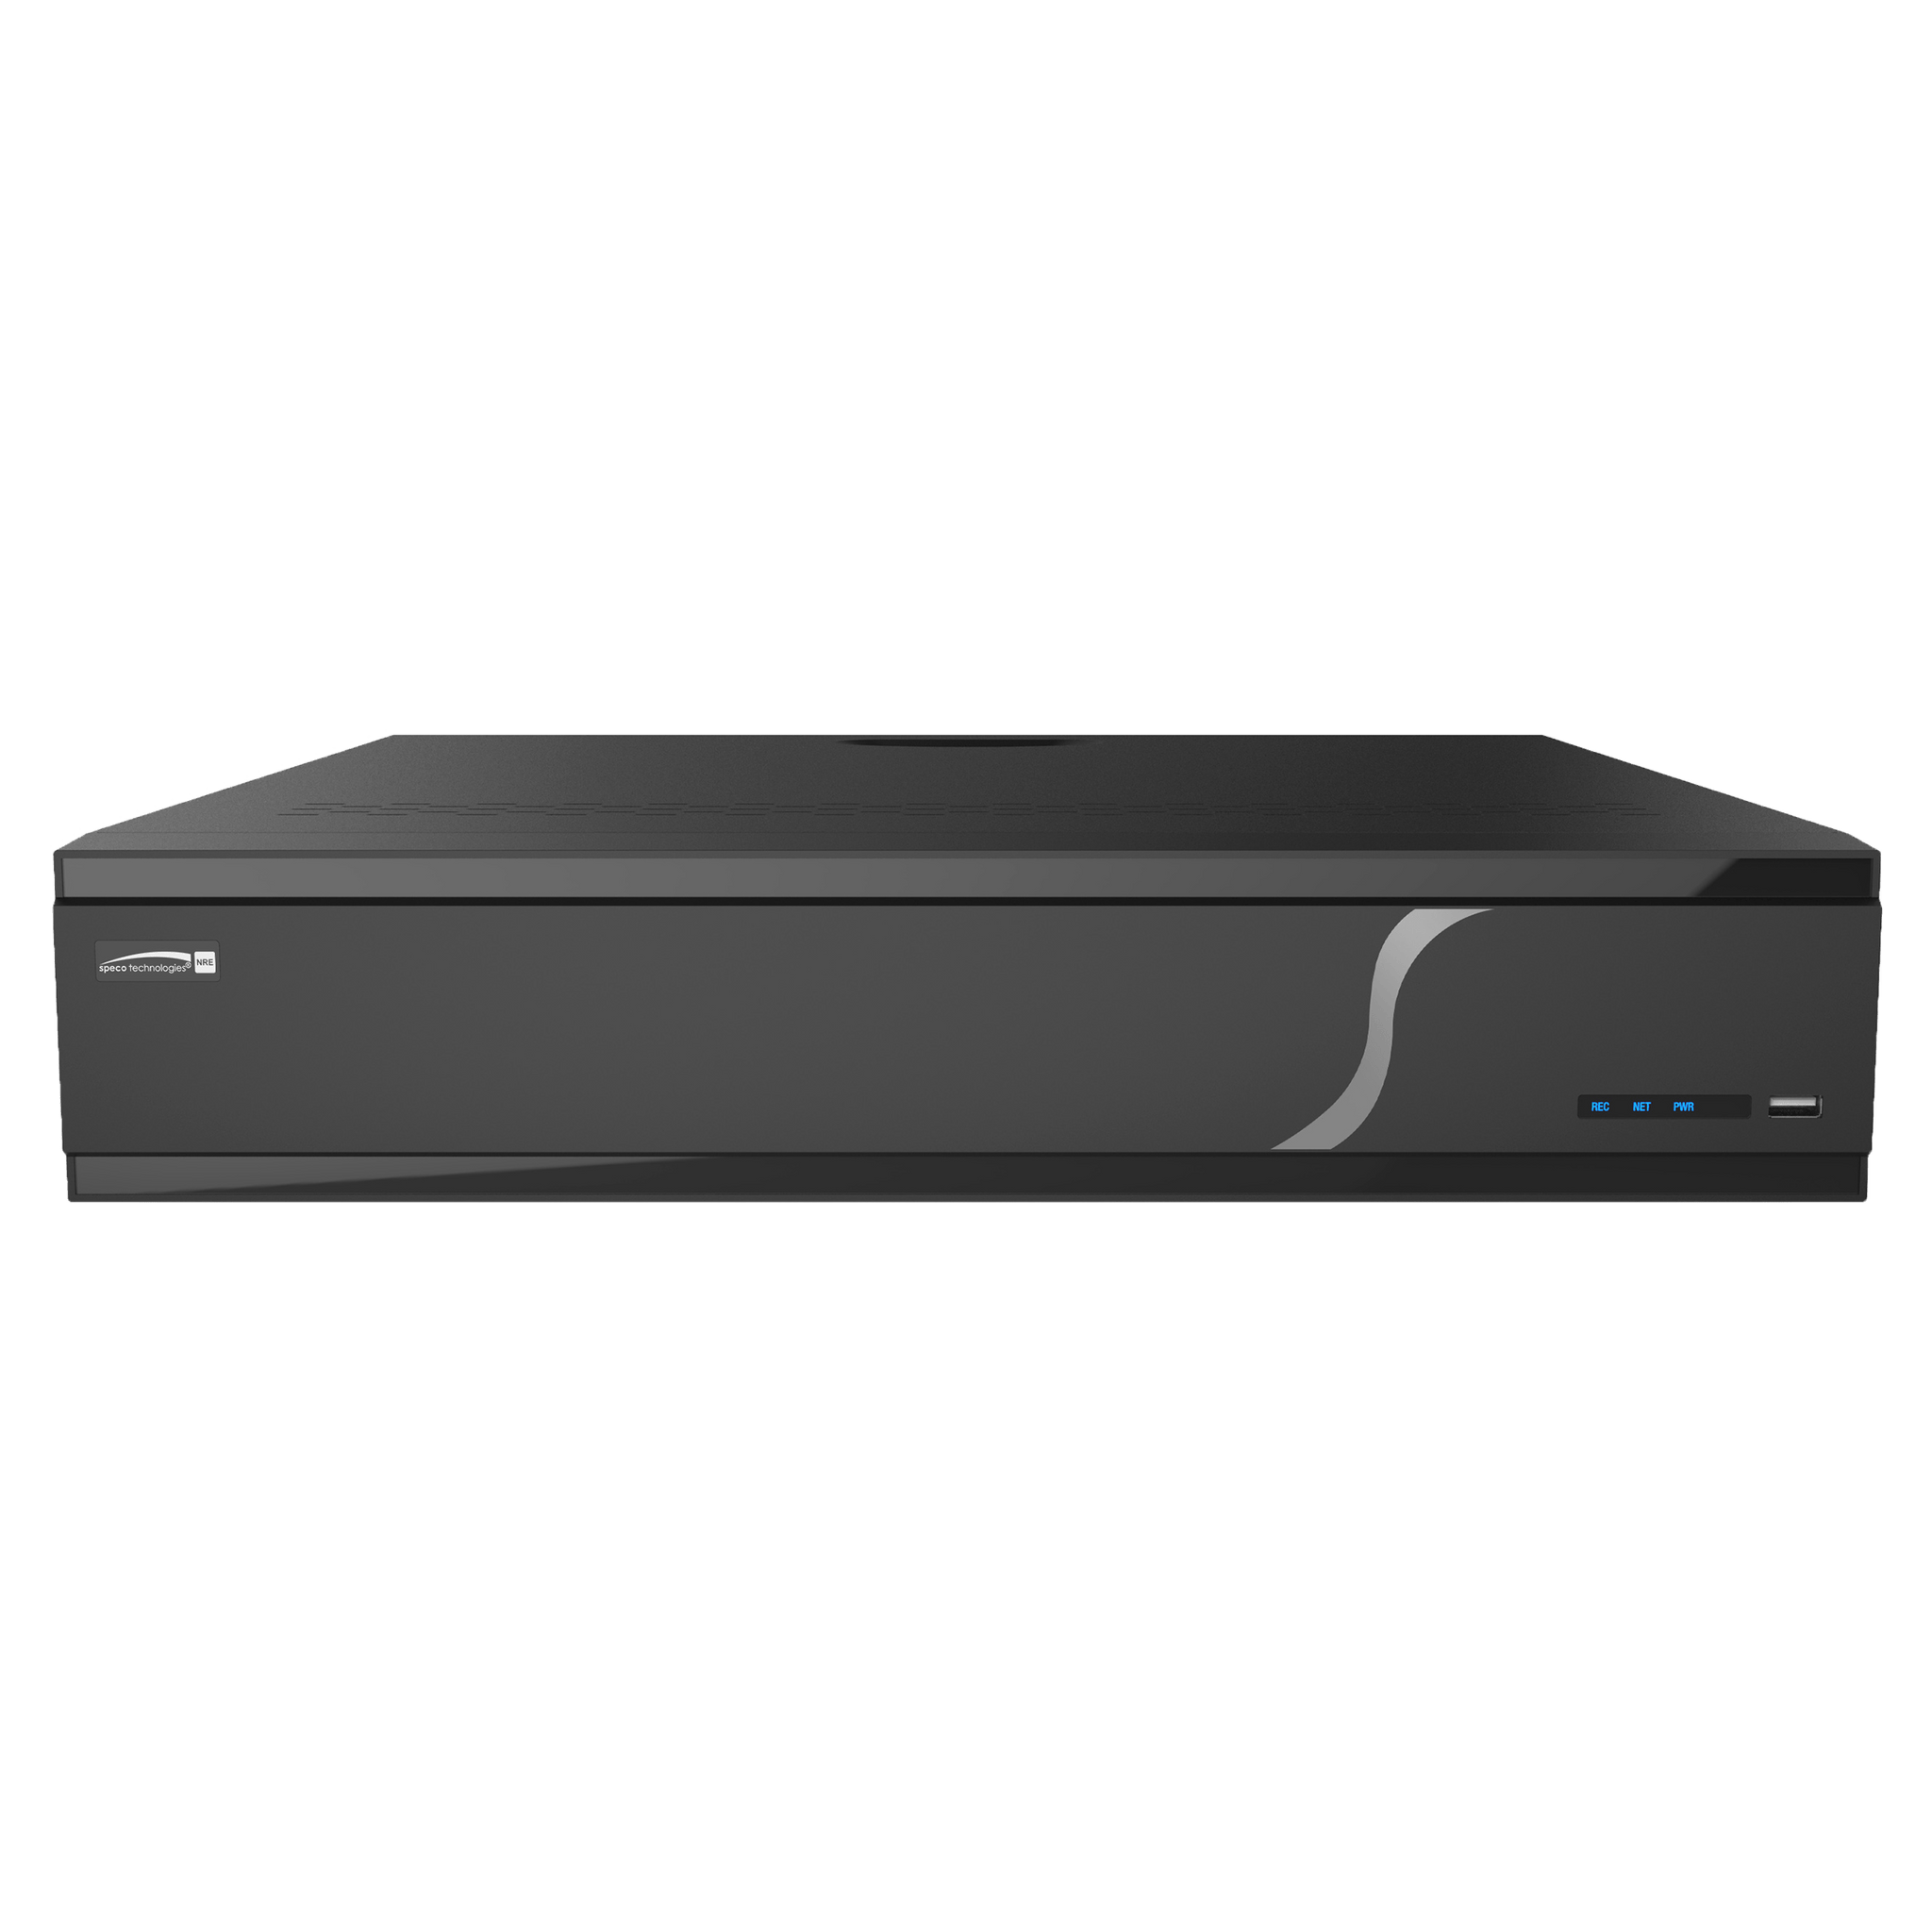 4K H.265 NVR with Facial Recognition and Smart Analytics 32 Channel NVR, 2-112TB Storage